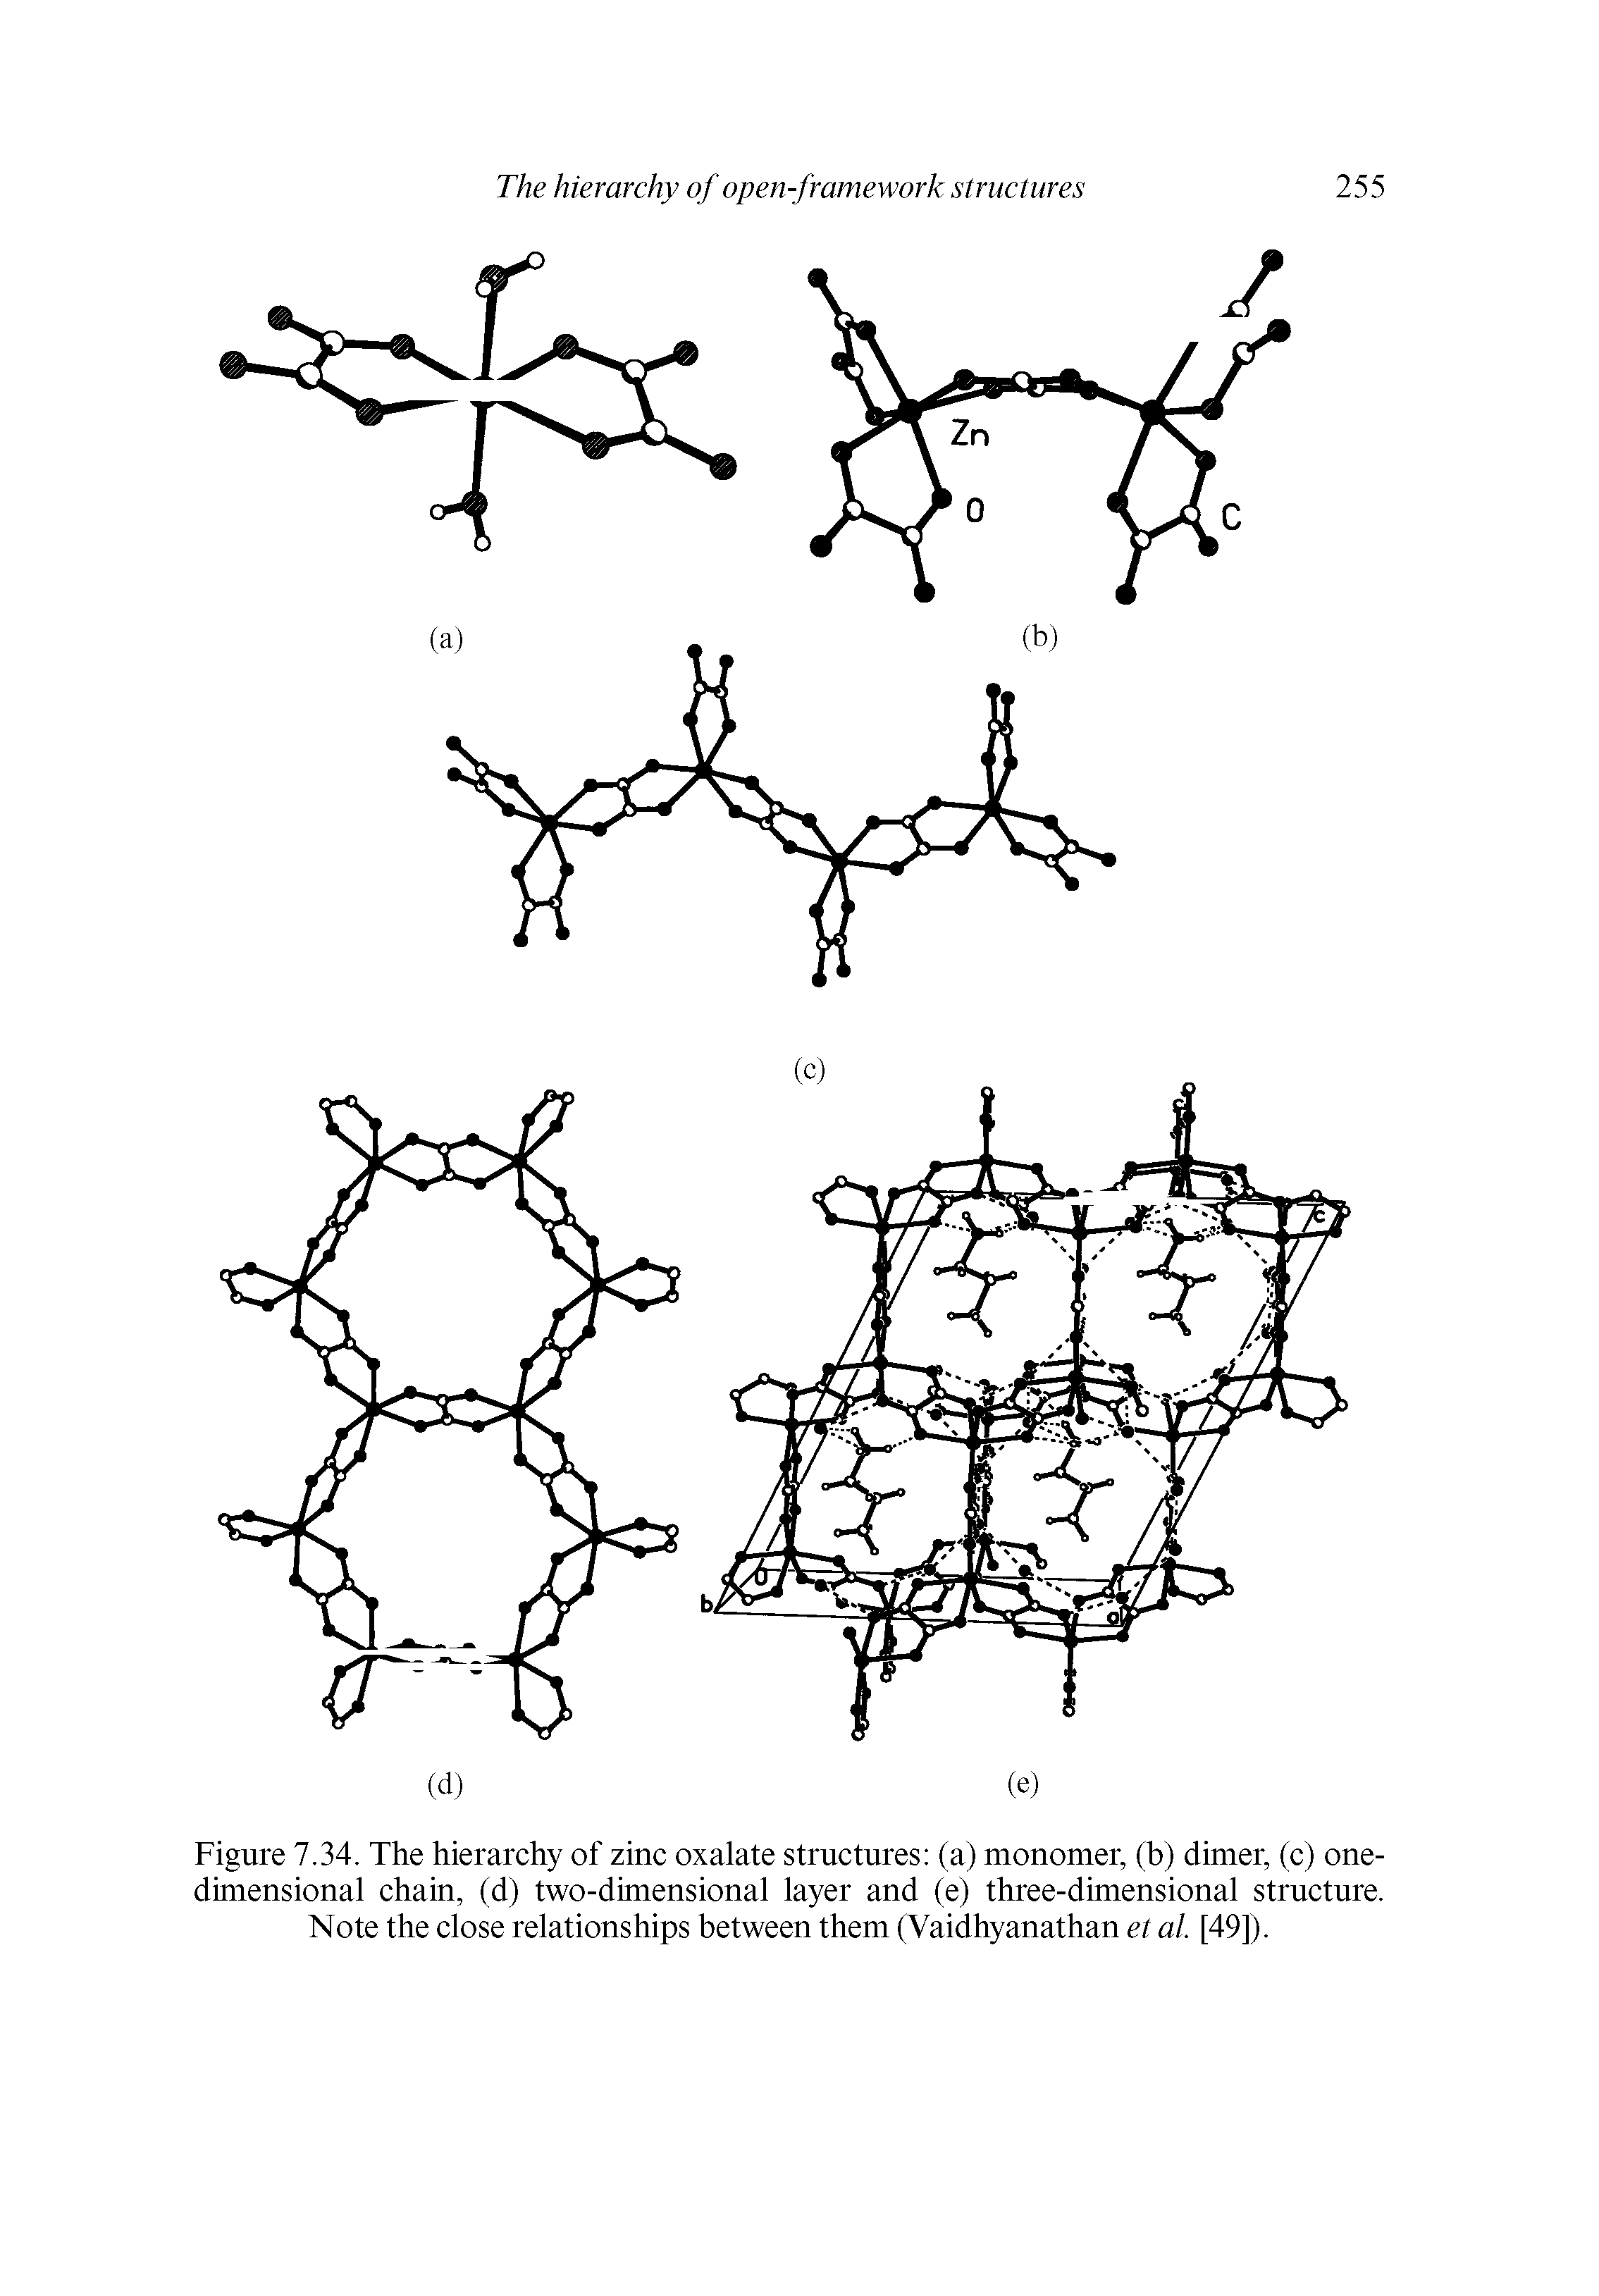 Figure 7.34. The hierarchy of zinc oxalate structures (a) monomer, (b) dimer, (c) onedimensional chain, (d) two-dimensional layer and (e) three-dimensional structure. Note the close relationships between them (Vaidhyanathan et al. [49]).